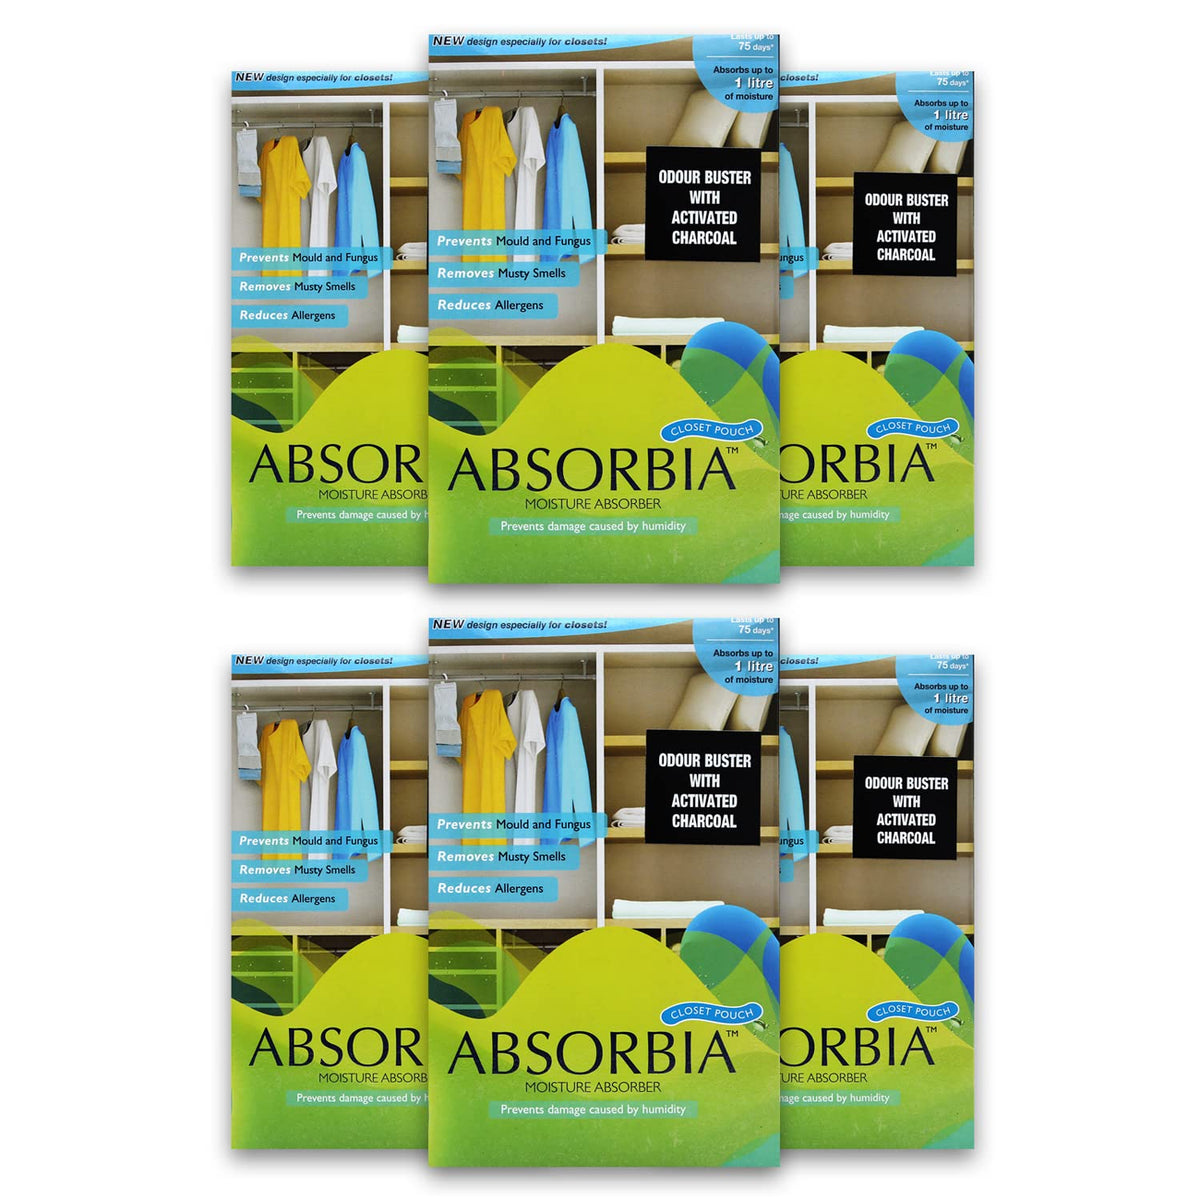 Absorbia Moisture Absorber Hanging Pouch with Activated Charcoal Season Pack of 6 (440 gms X 6 pouches) | Absorption Capacity 1000ml Each| Dehumidifier for Mould, Fungus & Musty Smells